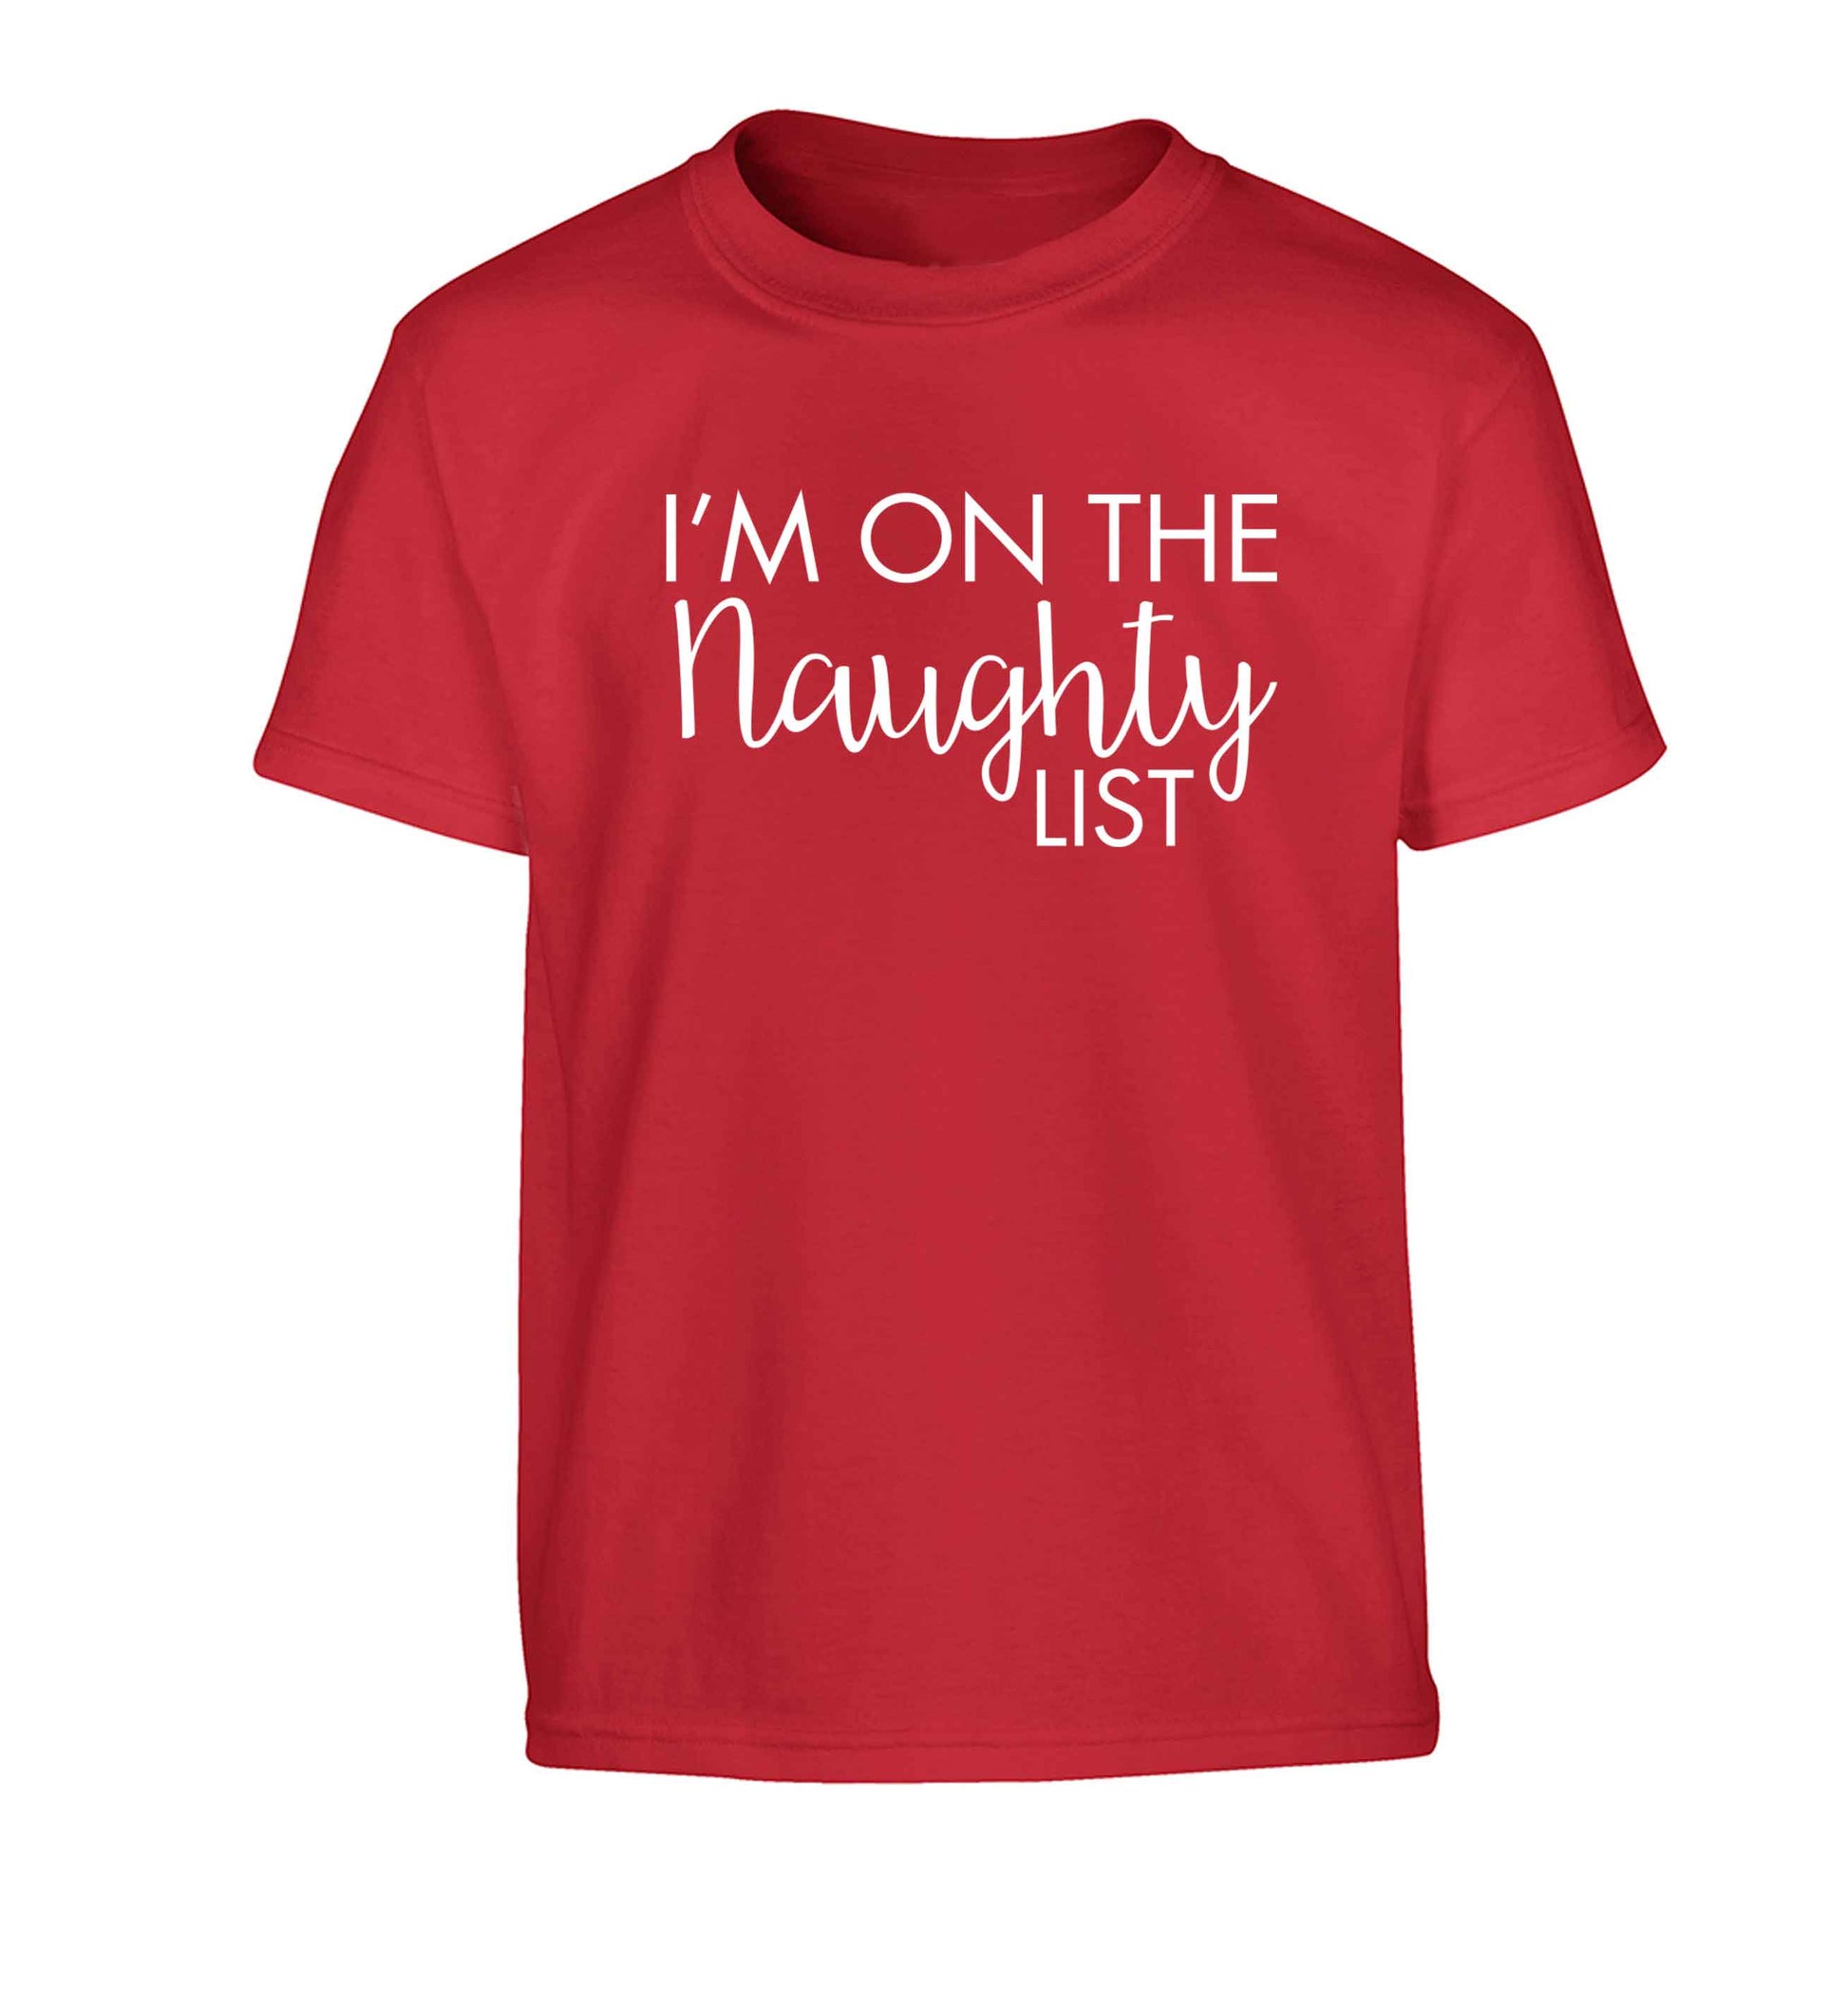 I'm on the naughty list Children's red Tshirt 12-13 Years